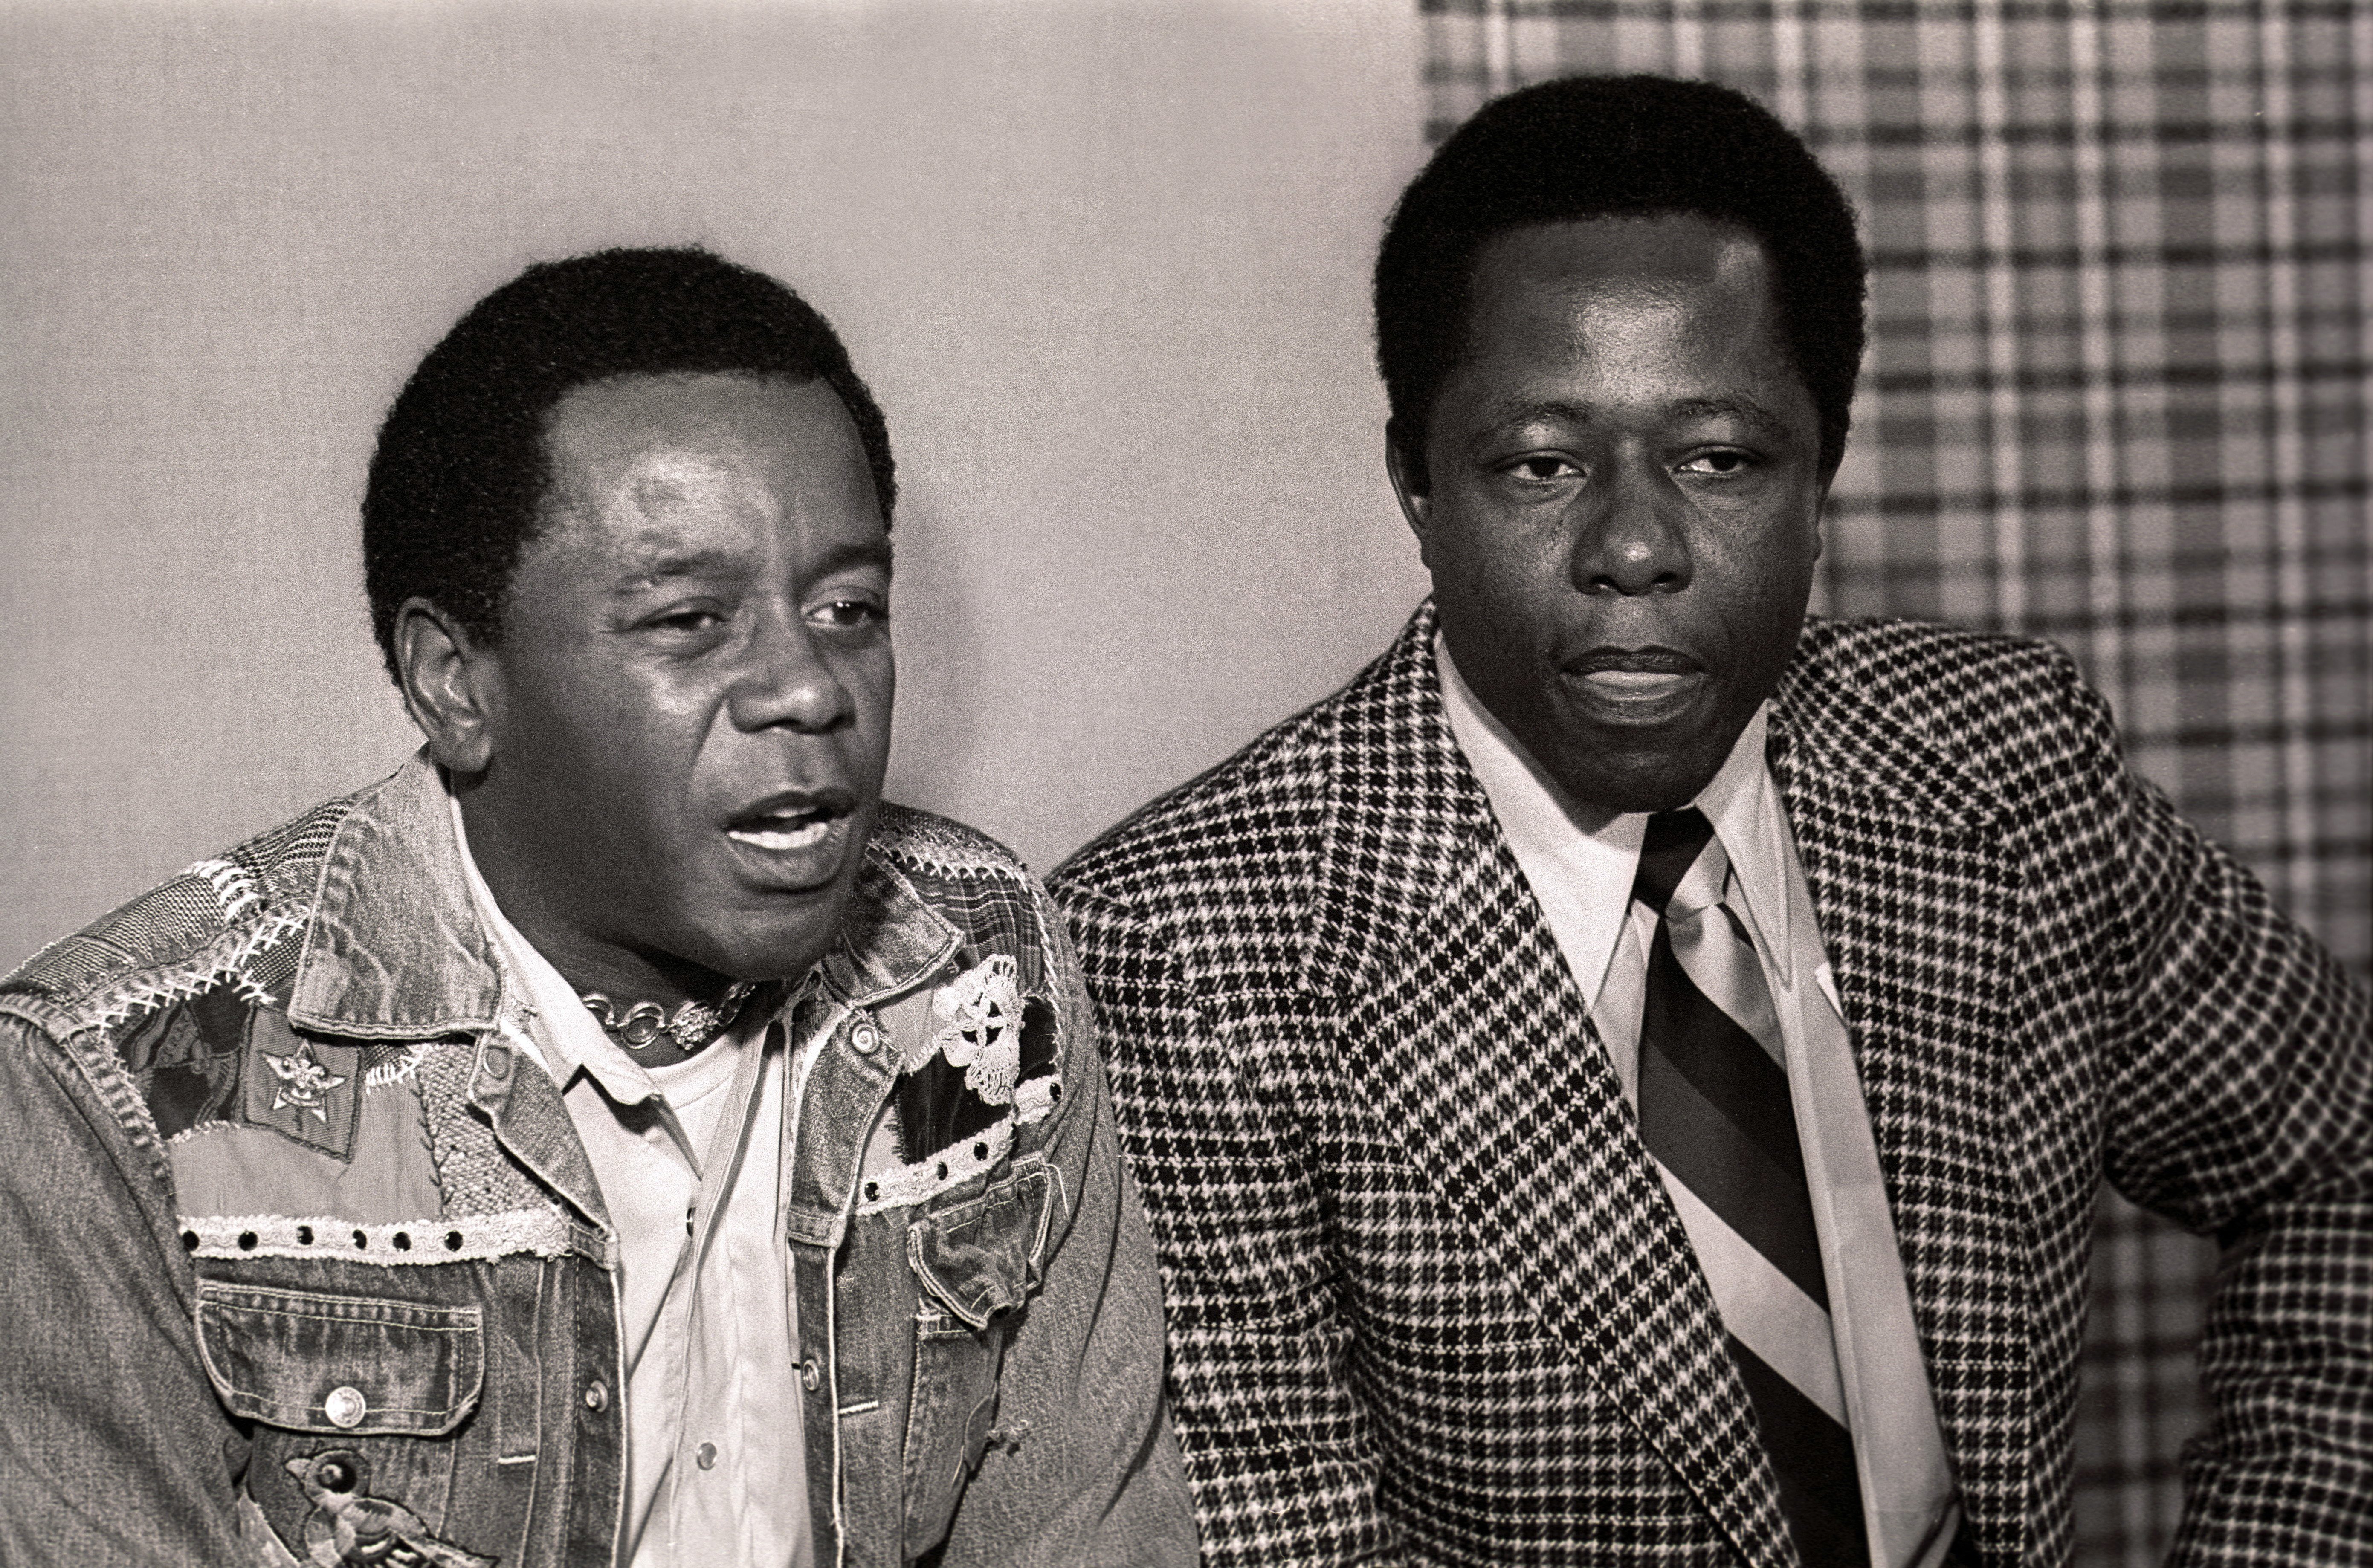 Flip Wilson and Hank Aaron talk during a press conference before filming NBC-TV's "The Flip Wilson Show" on October 15, 1973 | Photo: Getty Images